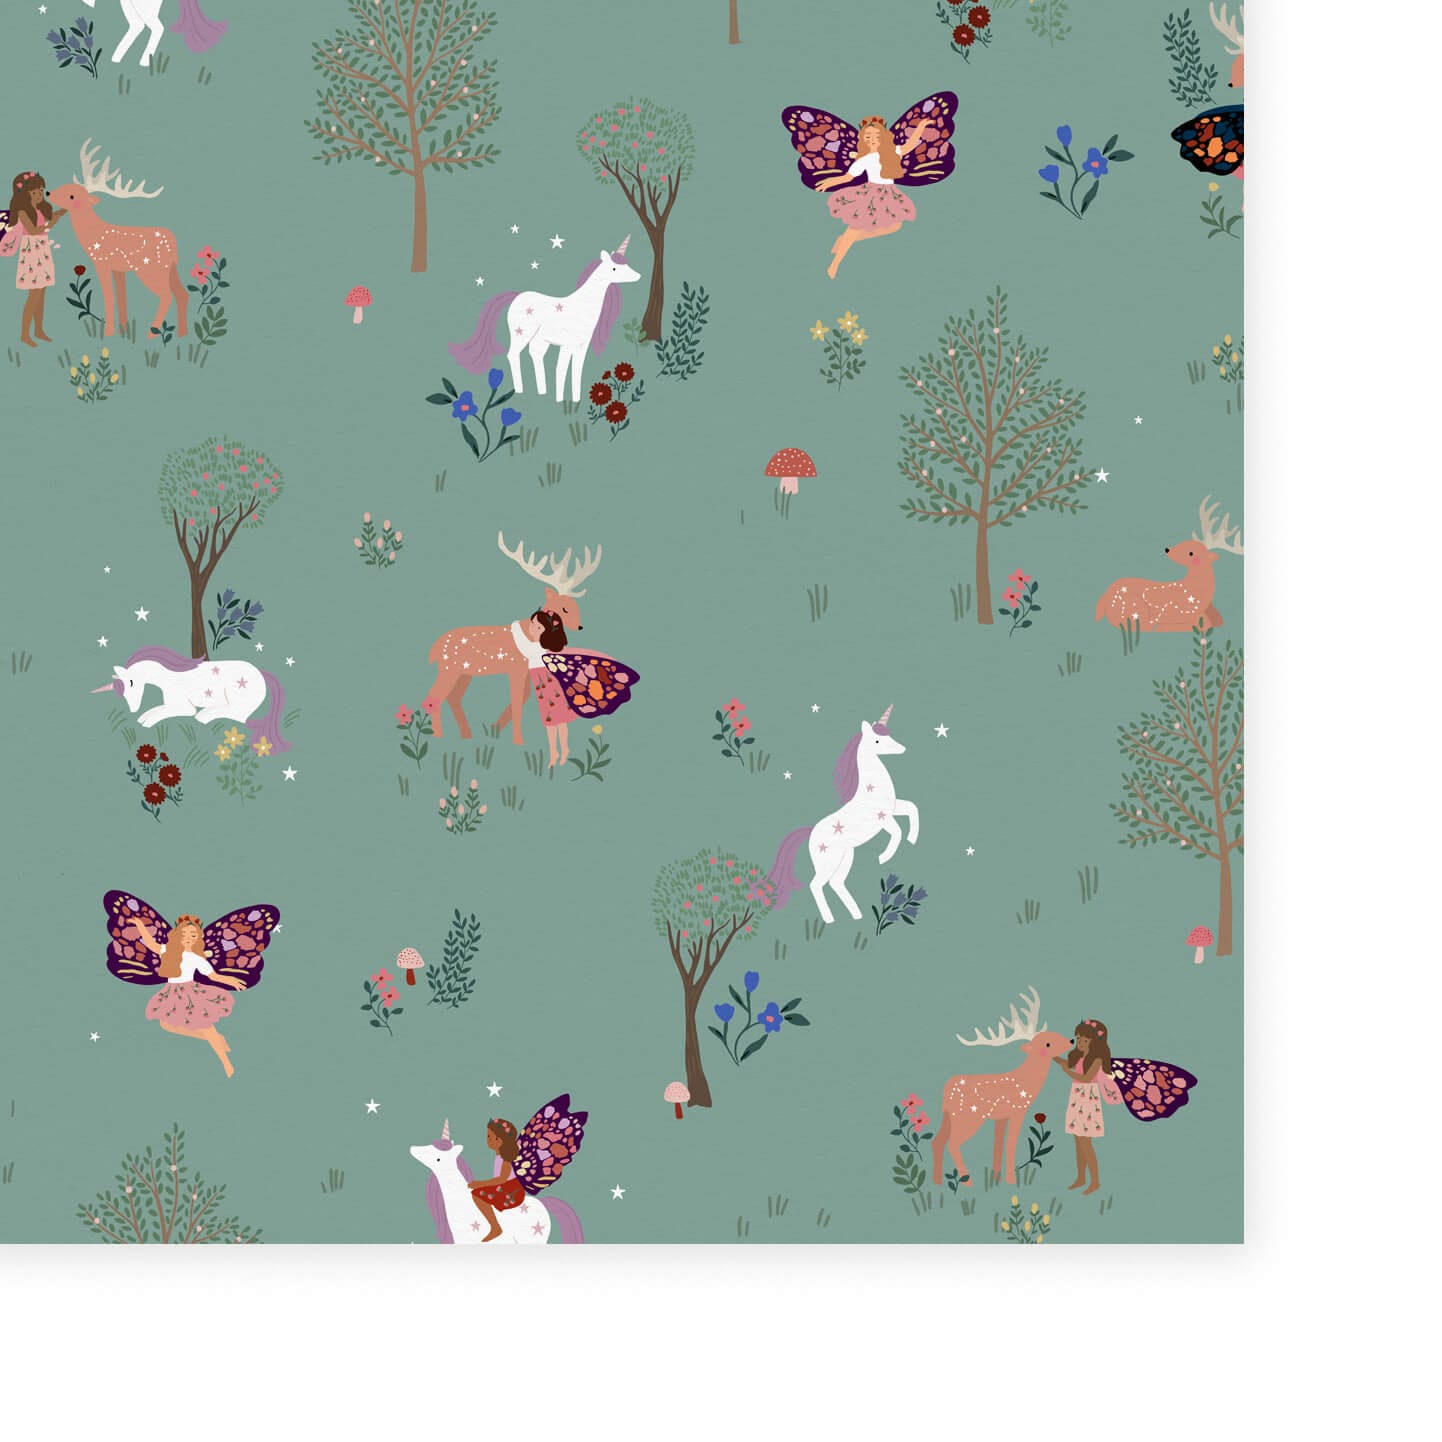 Wallpaper of a Green magical forest with white and purple unicorns, red and white toadstools, brown deers and delicate fairies. Flowers and trees.